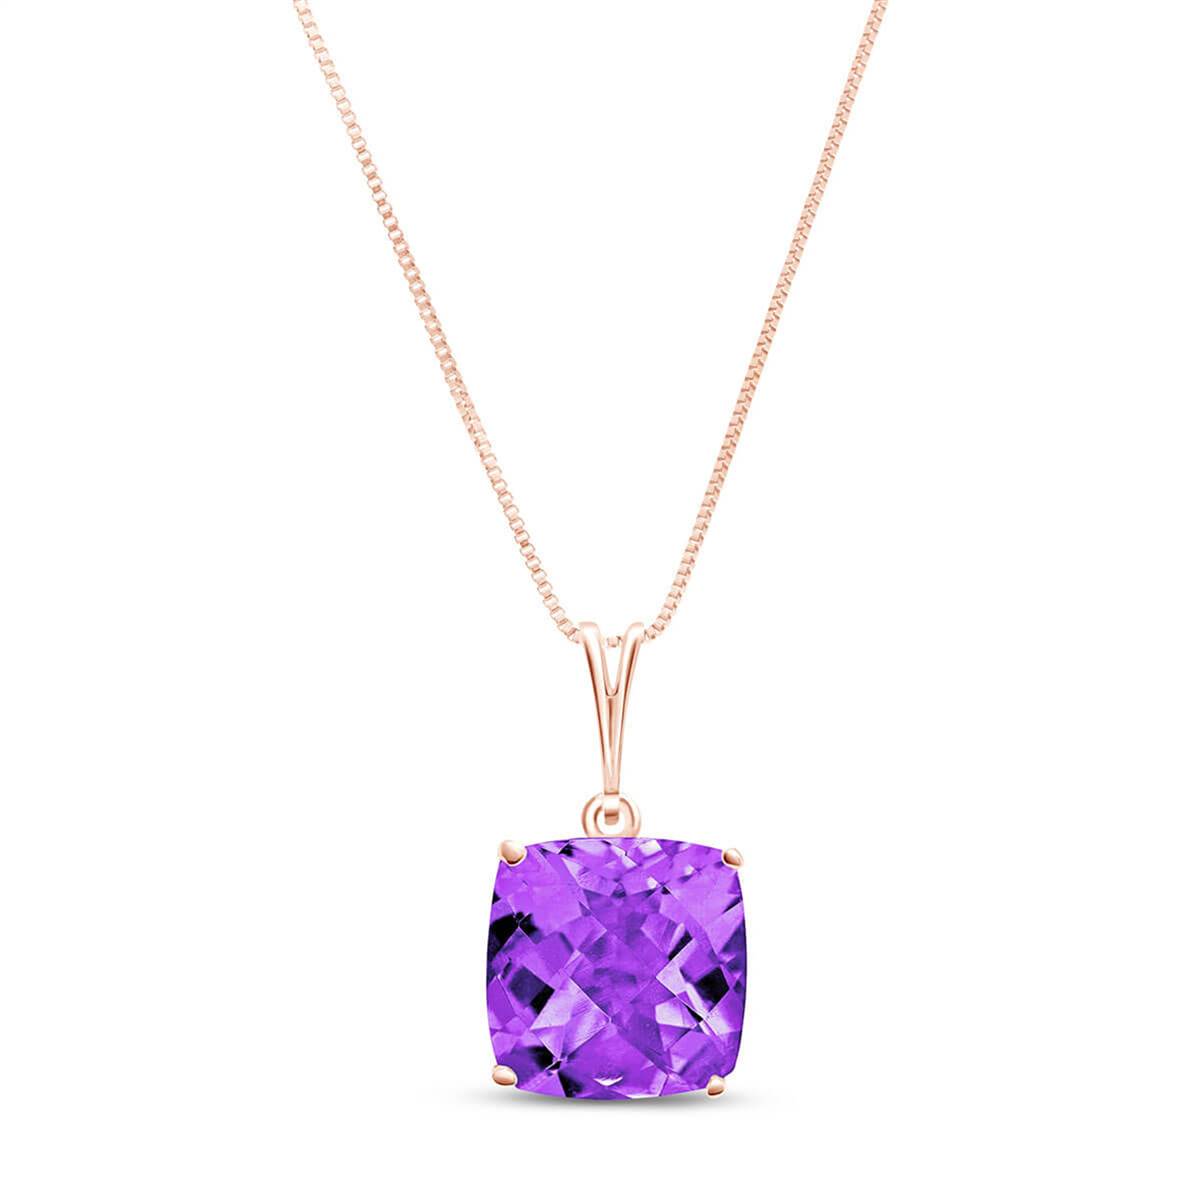 3.6 Carat 14K Solid Rose Gold Necklace Natural Checkerboard Cut Purple Amethyst